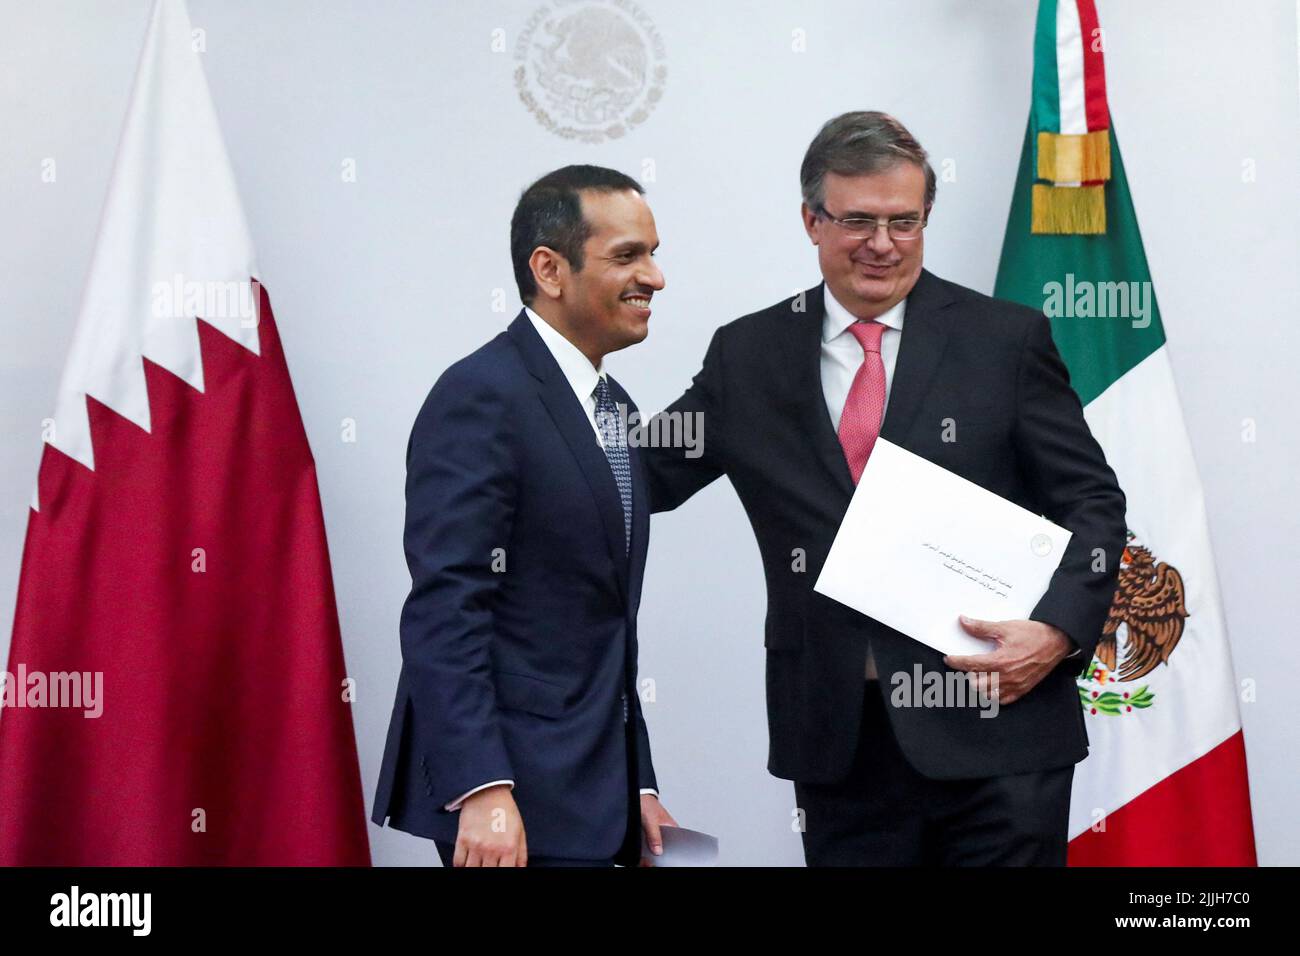 Qatar’s Foreign Minister, Mohammed bin Abdulrahman bin Jassim Al Than, and Mexico’s Foreign Minister, Marcelo Ebrard, smile after they addressed the media at the Foreign Ministry Building (SRE) in Mexico City, Mexico, July 26, 2022. REUTERS/Edgard Garrido Stock Photo